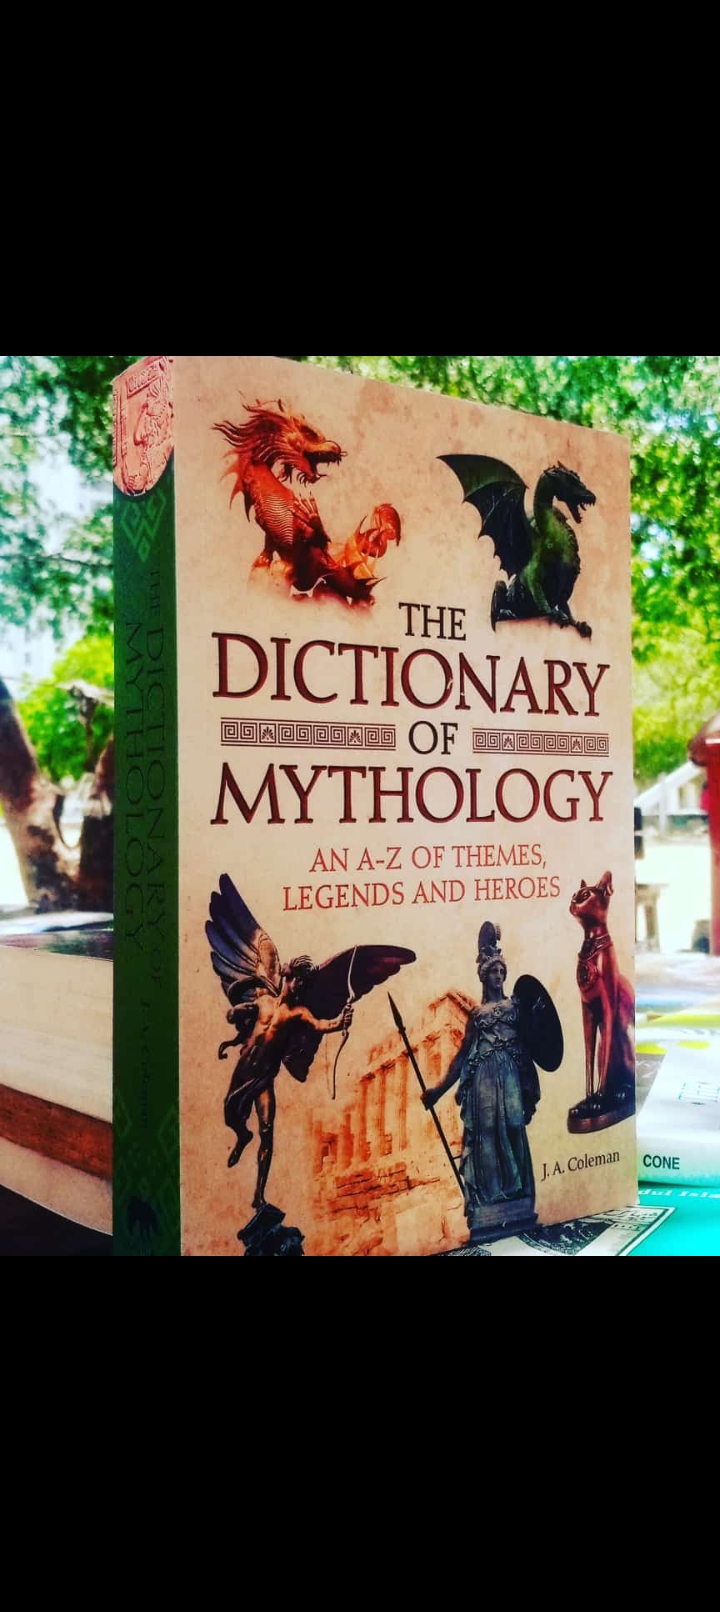 the dictionary of mythology an a-z of themes, legends and heroes by j.a. coleman. new original paper